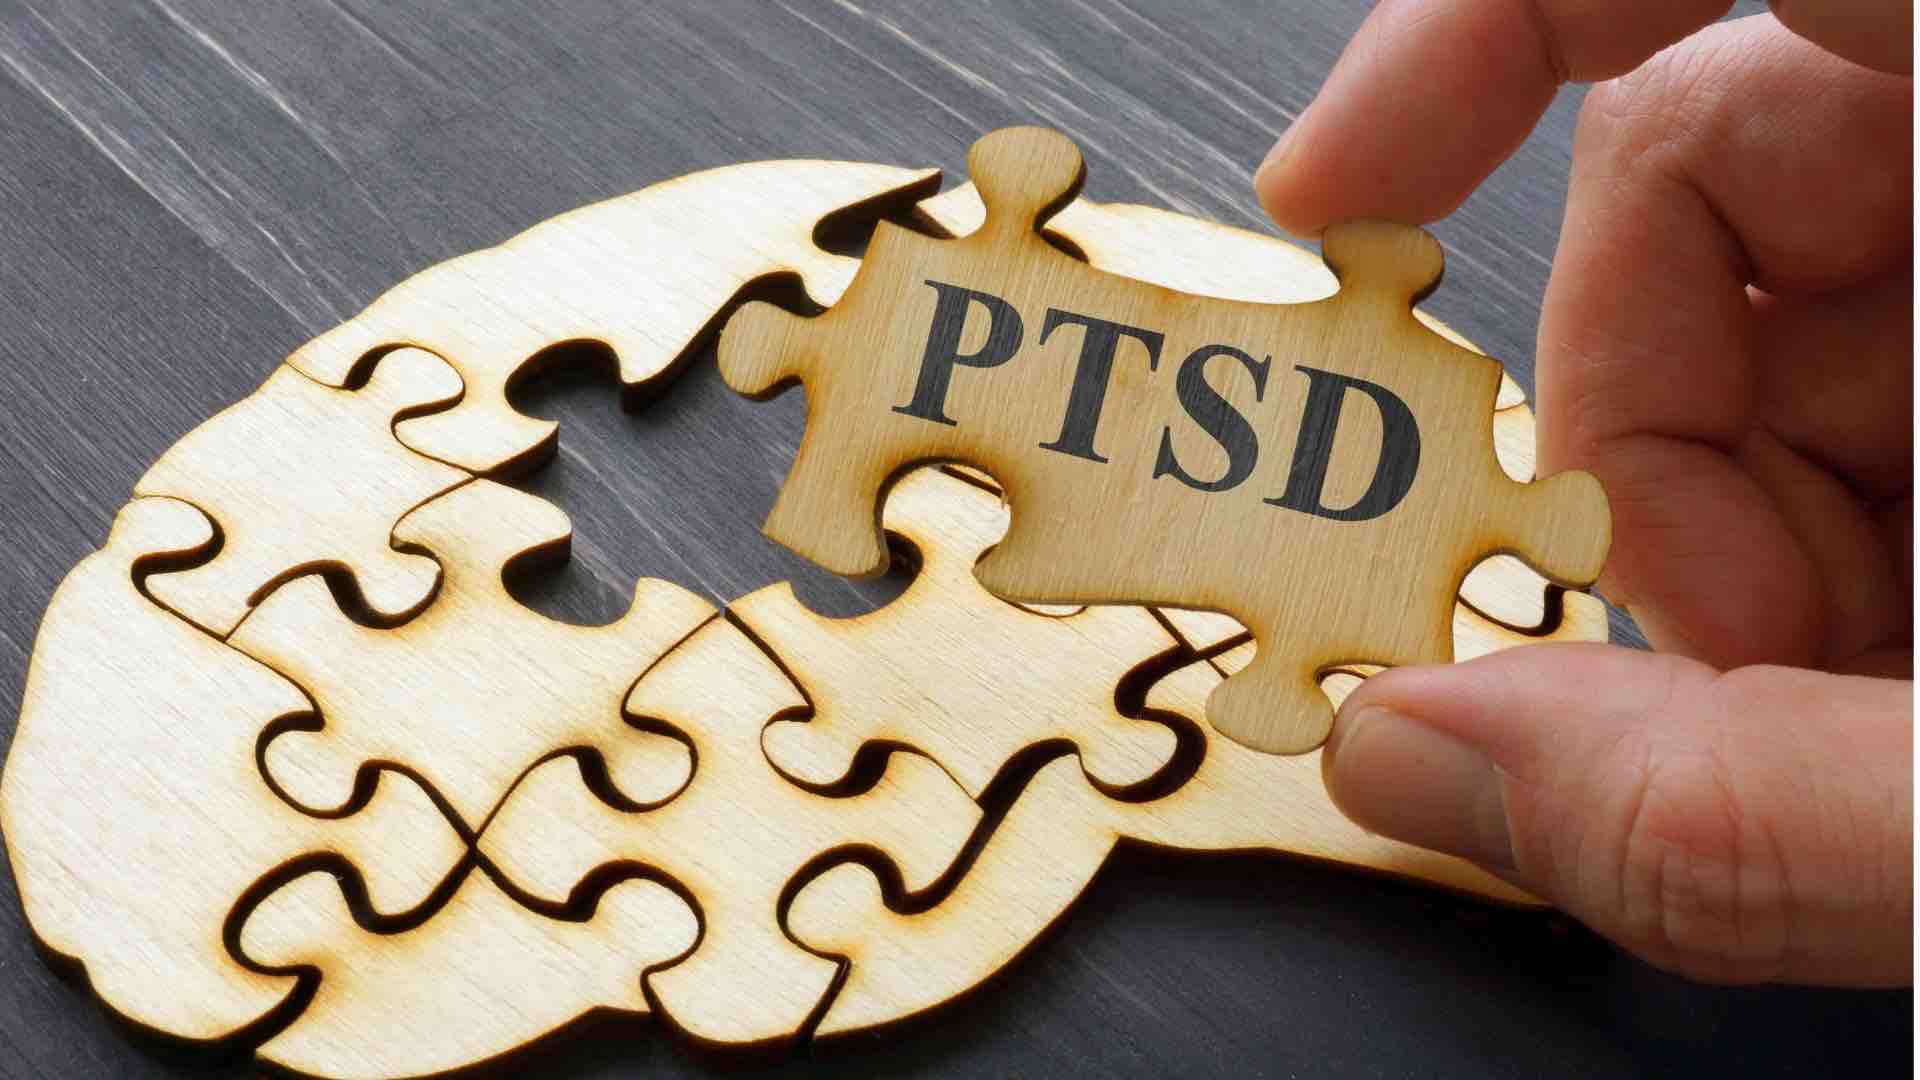 You can free yourself from PTSD by updating your brain.